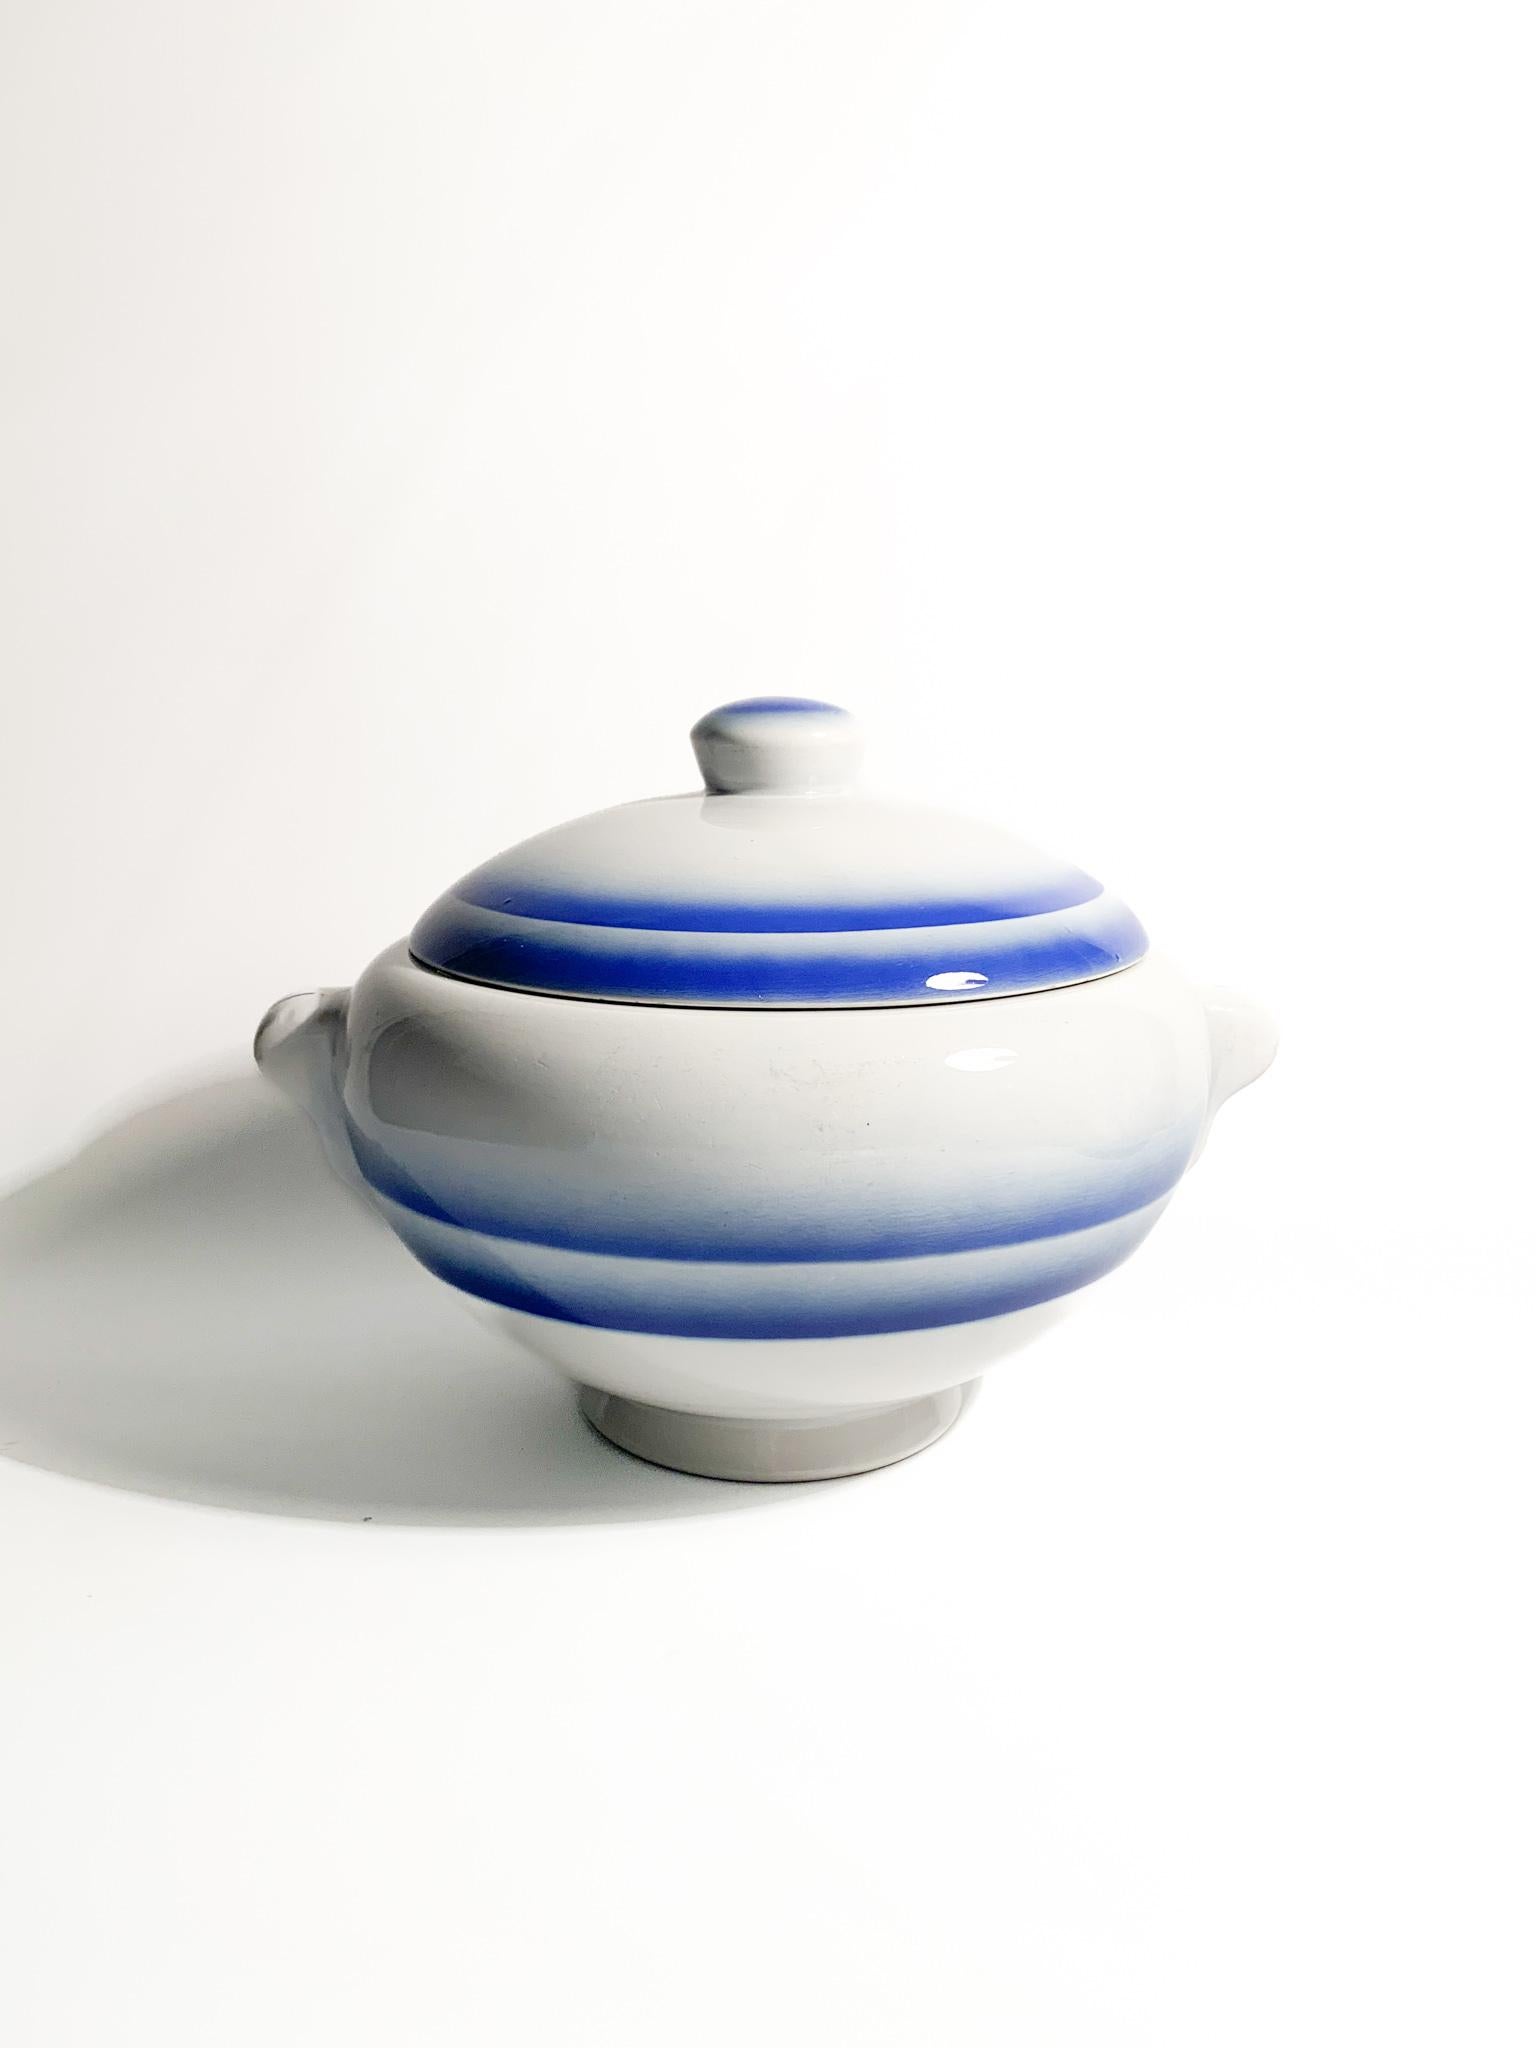 Centerpiece / tureen in white ceramic and blue stripes, made by Galvani Pordenone in the 1950s

Ø 25 cm h 16 cm

The 